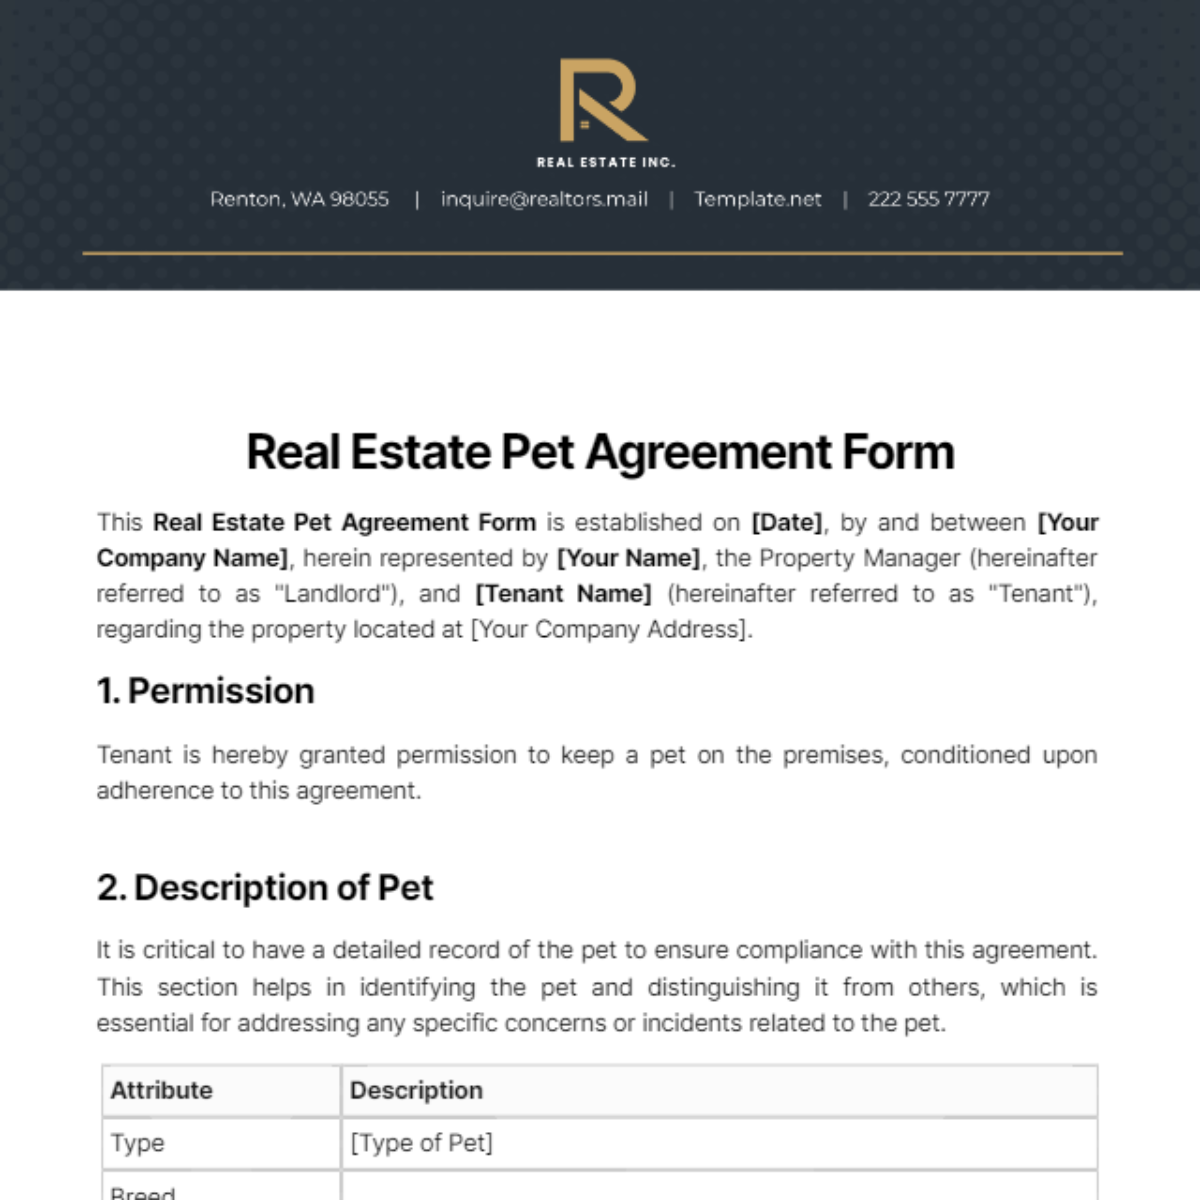 Real Estate Pet Agreement Form Template